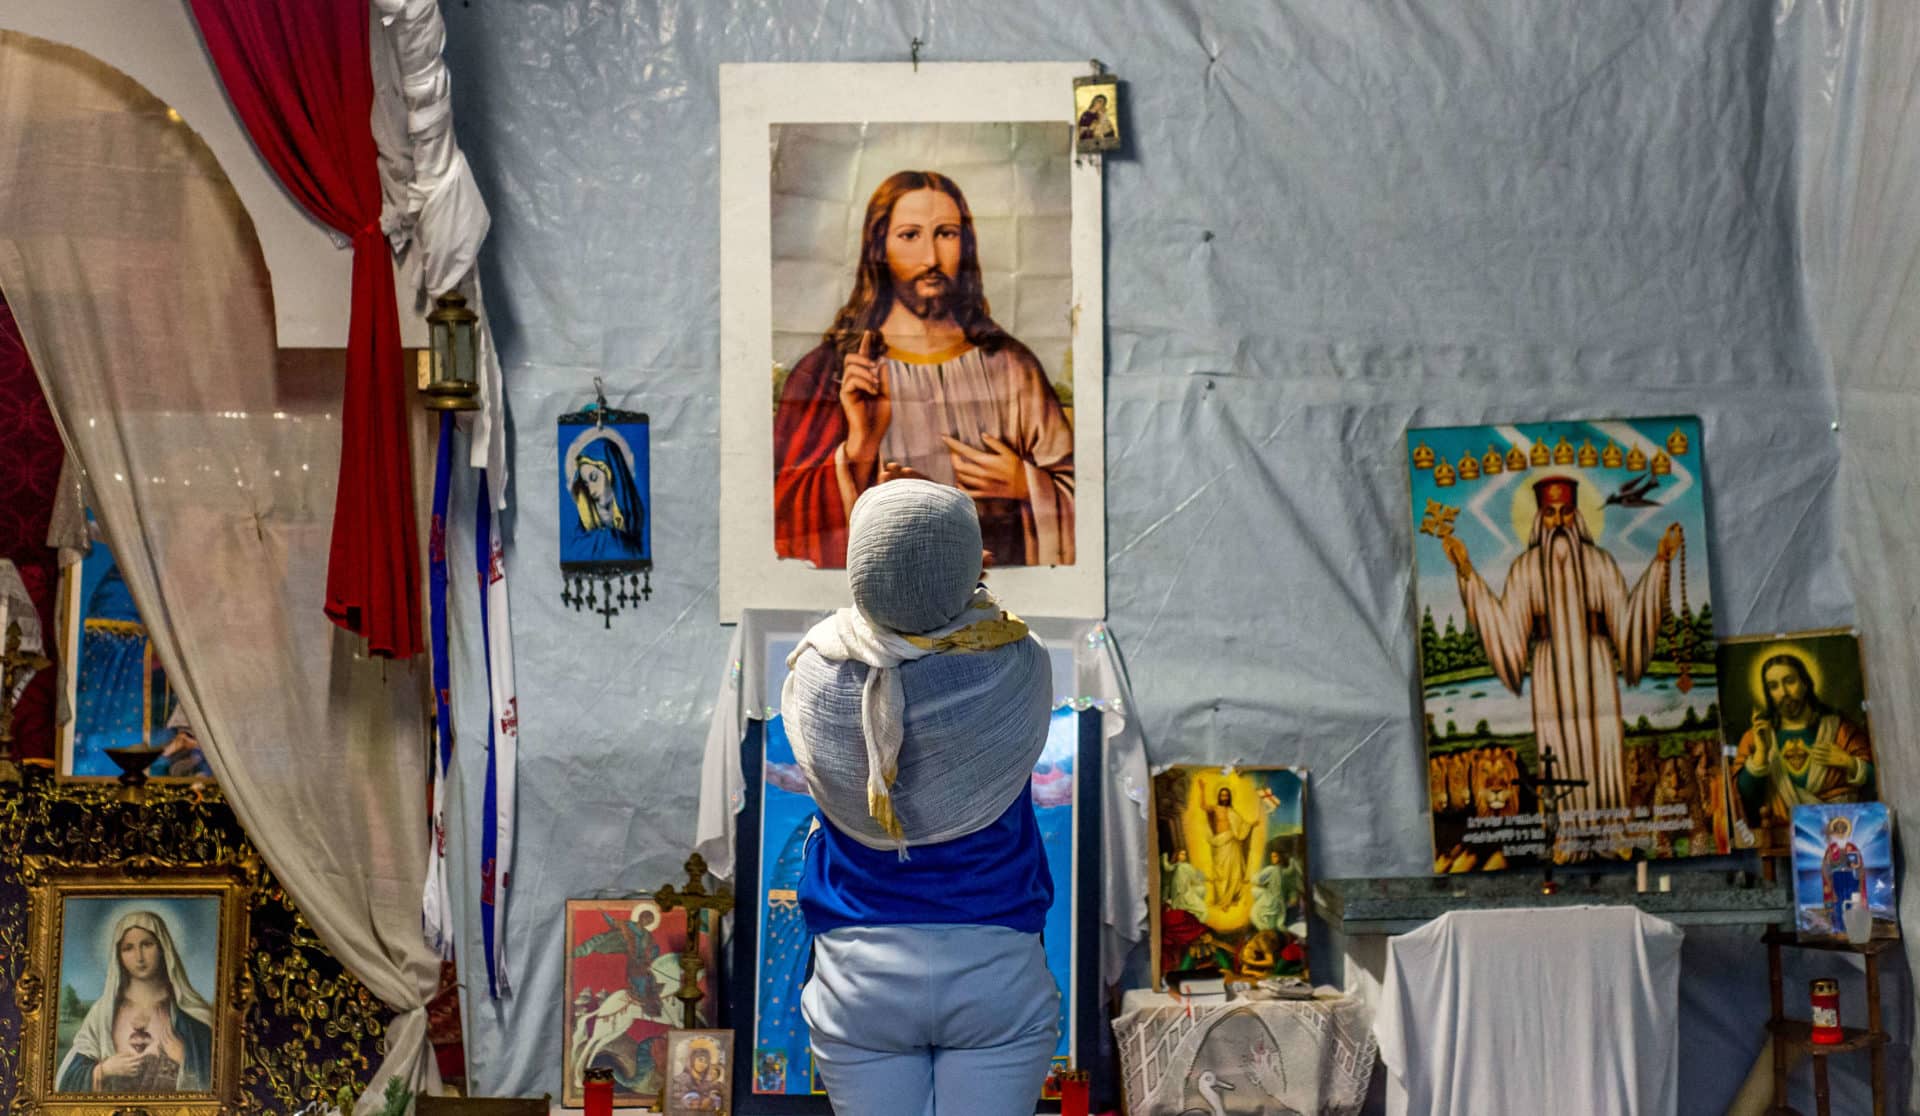 A refugee prays in front of an image of Christ in a makeshift church in a camp called "The Jungle" in 2015 in the port of Calais, France. (CNS photo/Stephanie Lecocq, EPA) See REPORT-FREEDOM May 3, 2016.